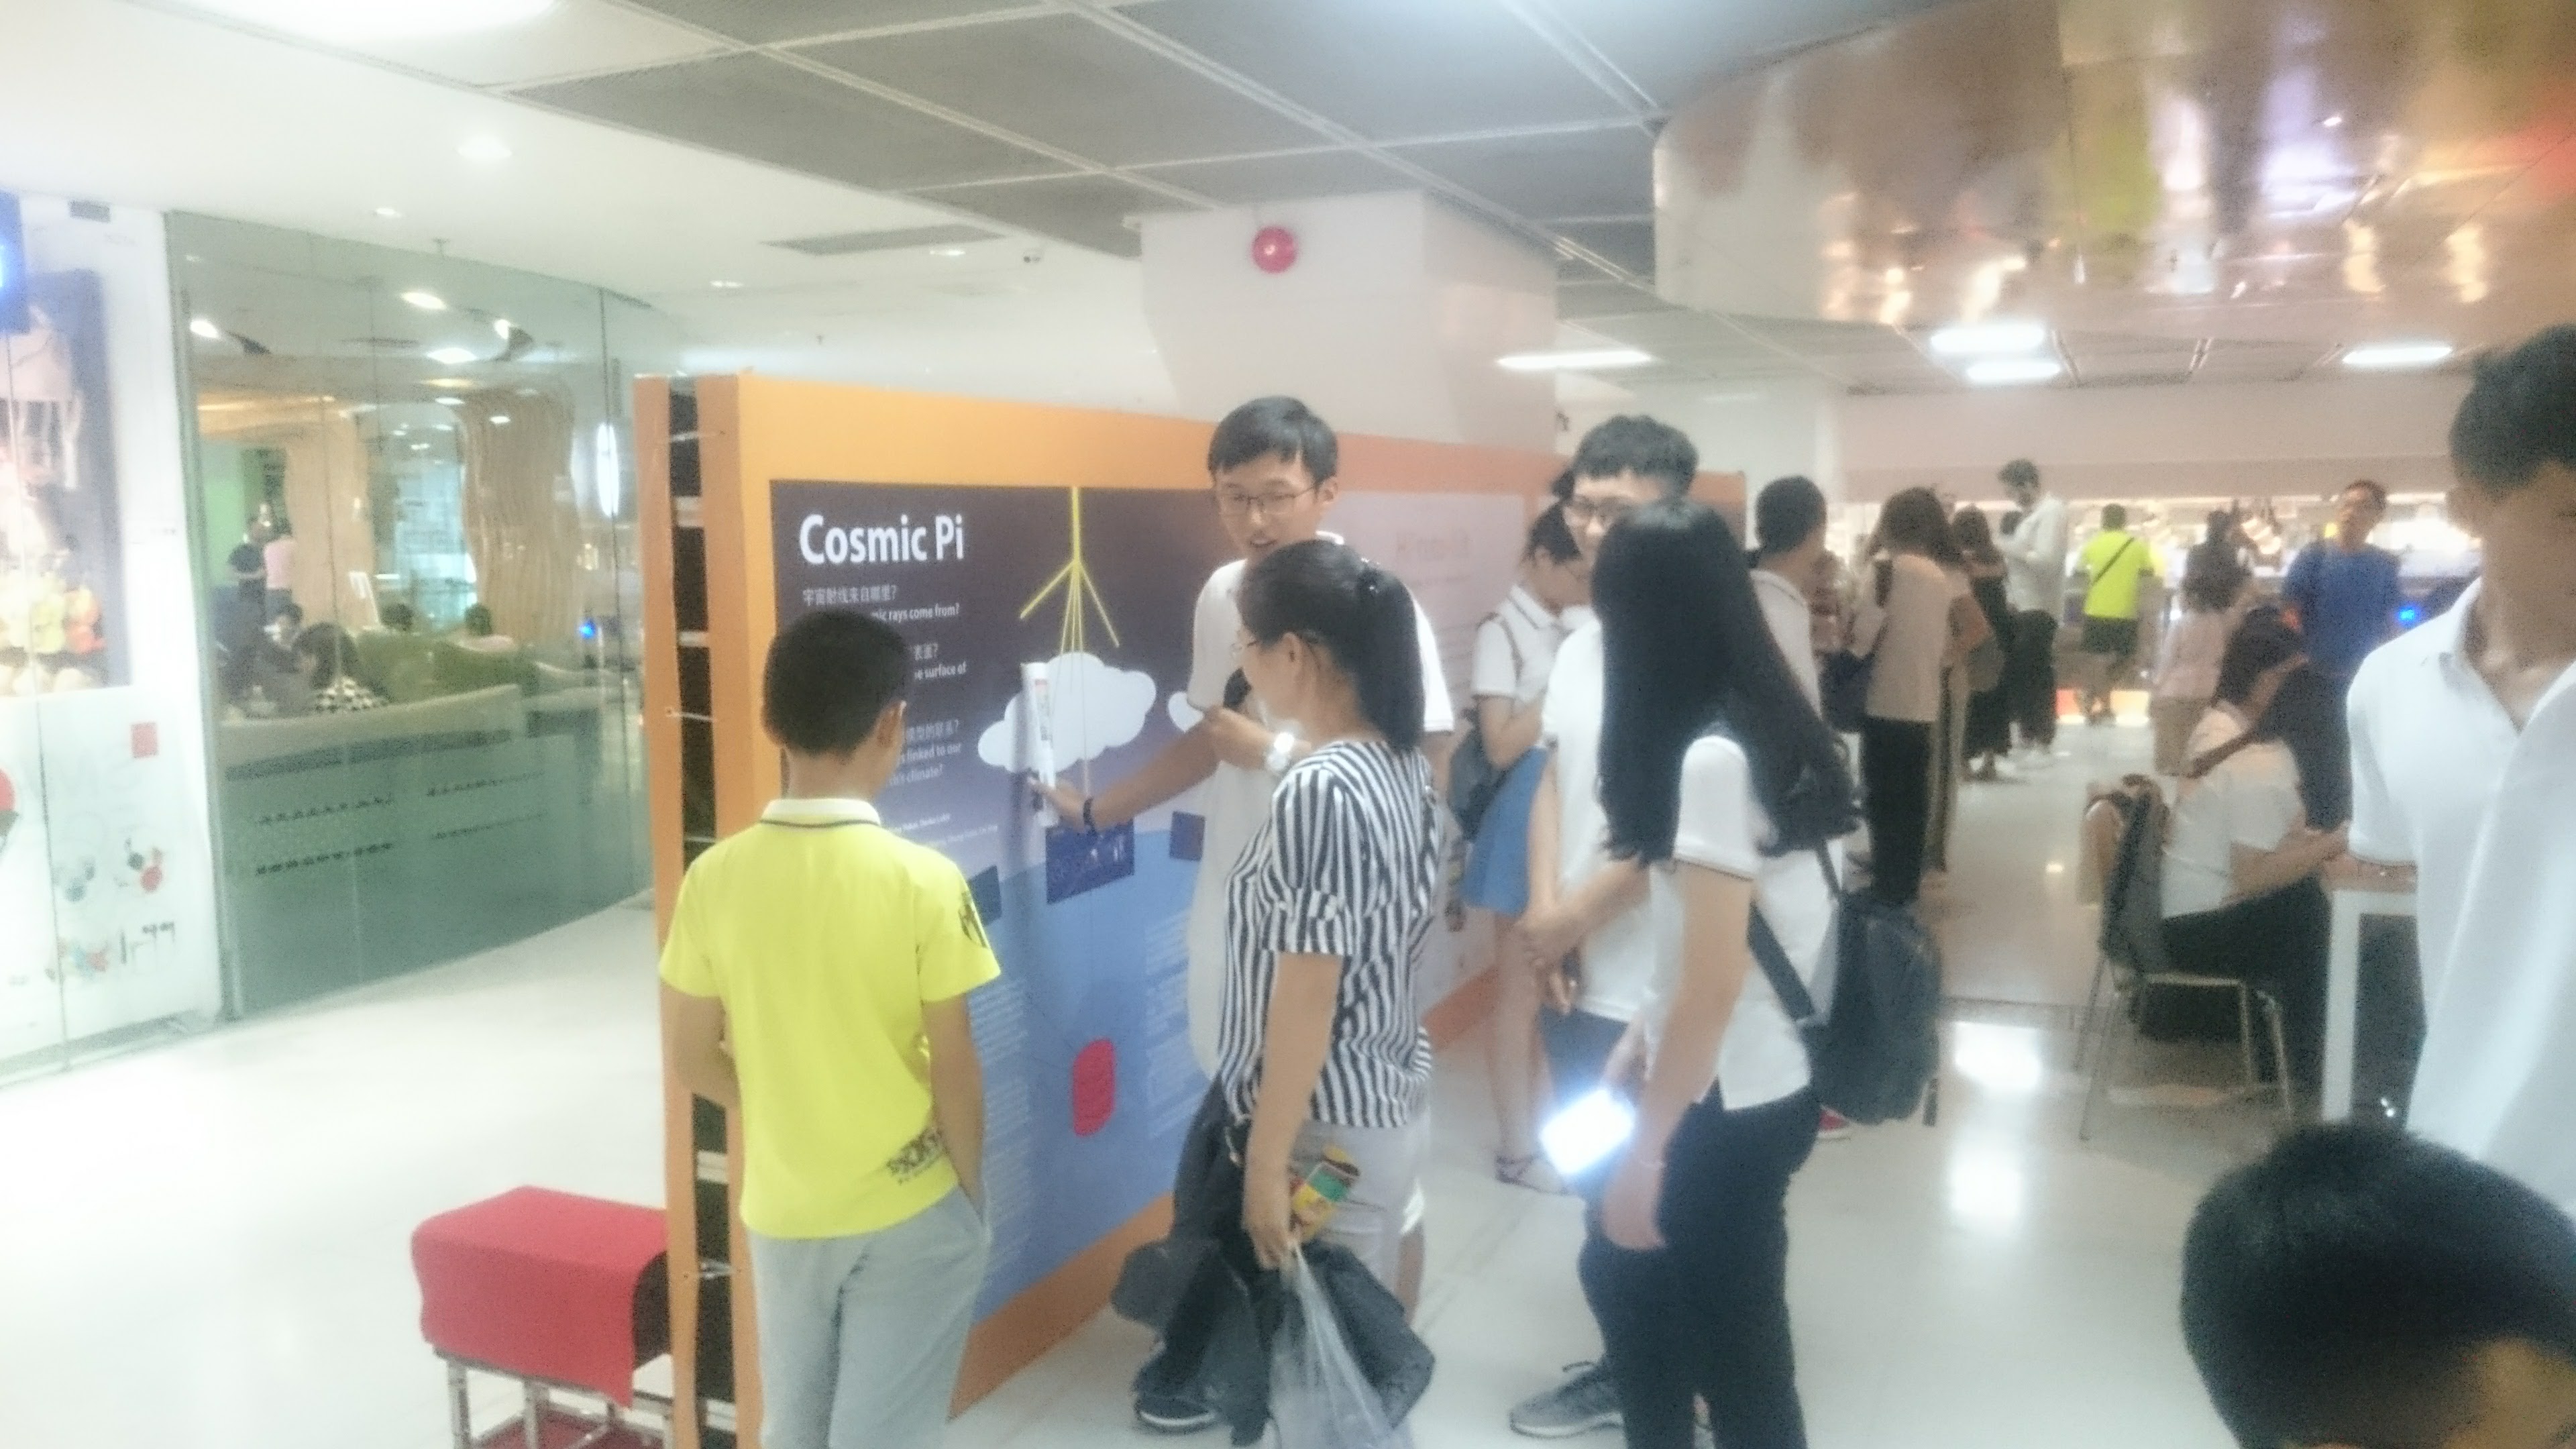 Poster session in Shenzhen